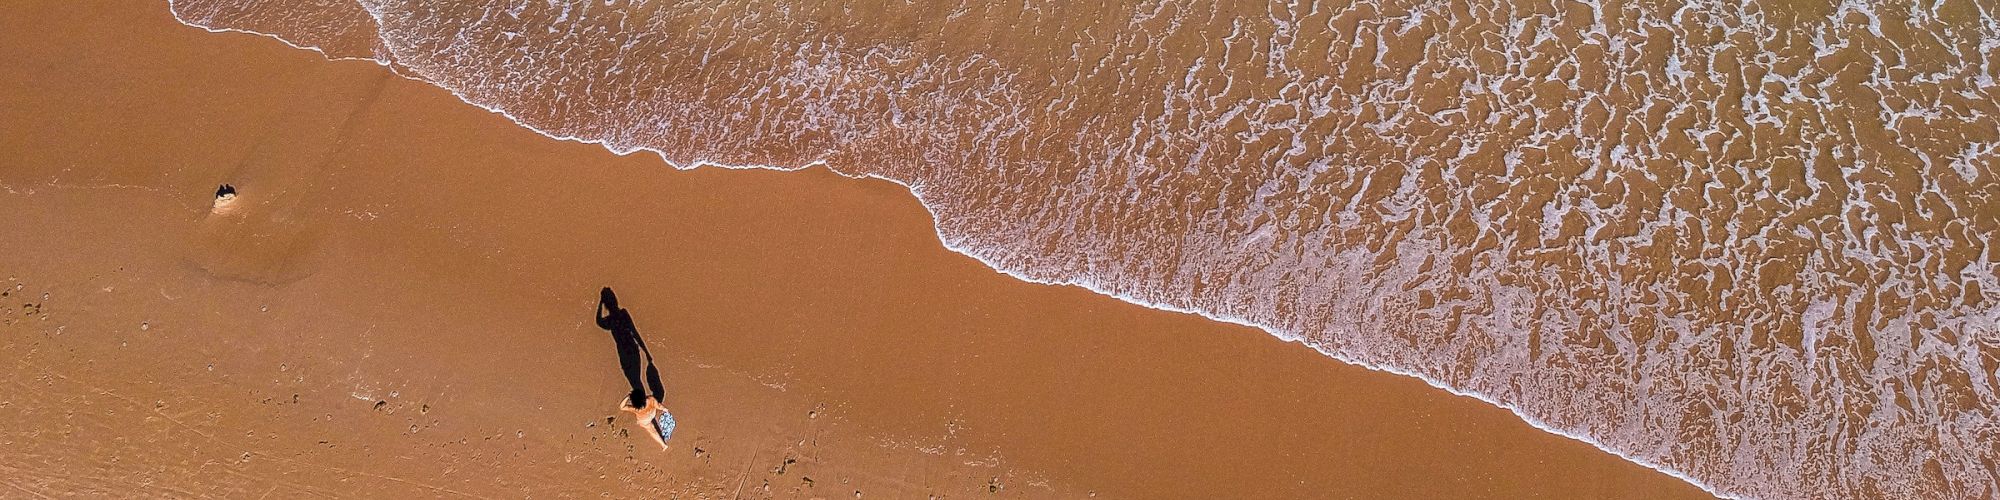 Aerial view of a beach with waves, a person, and sand.